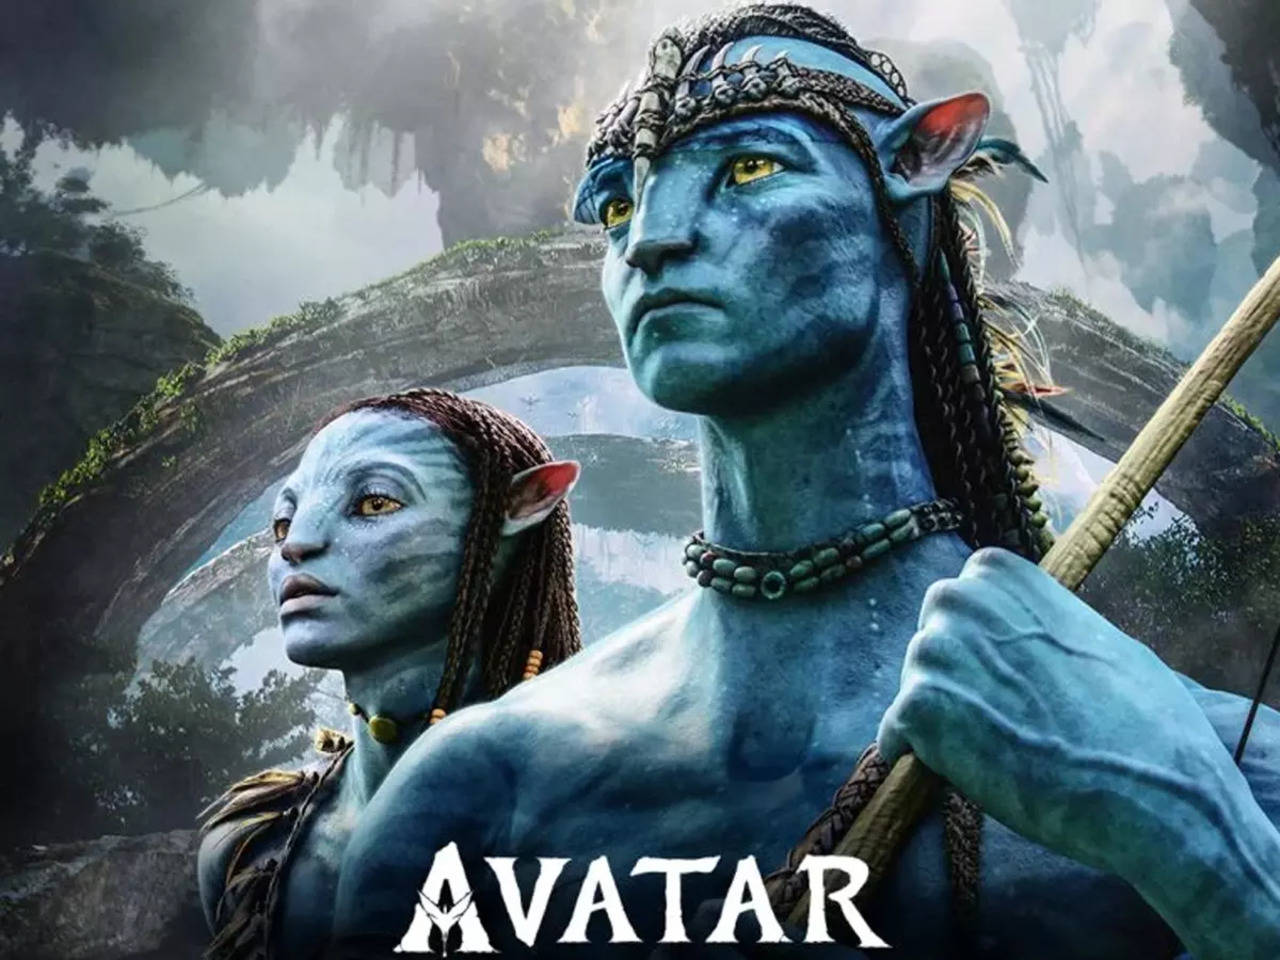 Avatar The Way of Water  Showtimes Tickets  Reviews  Atom Tickets